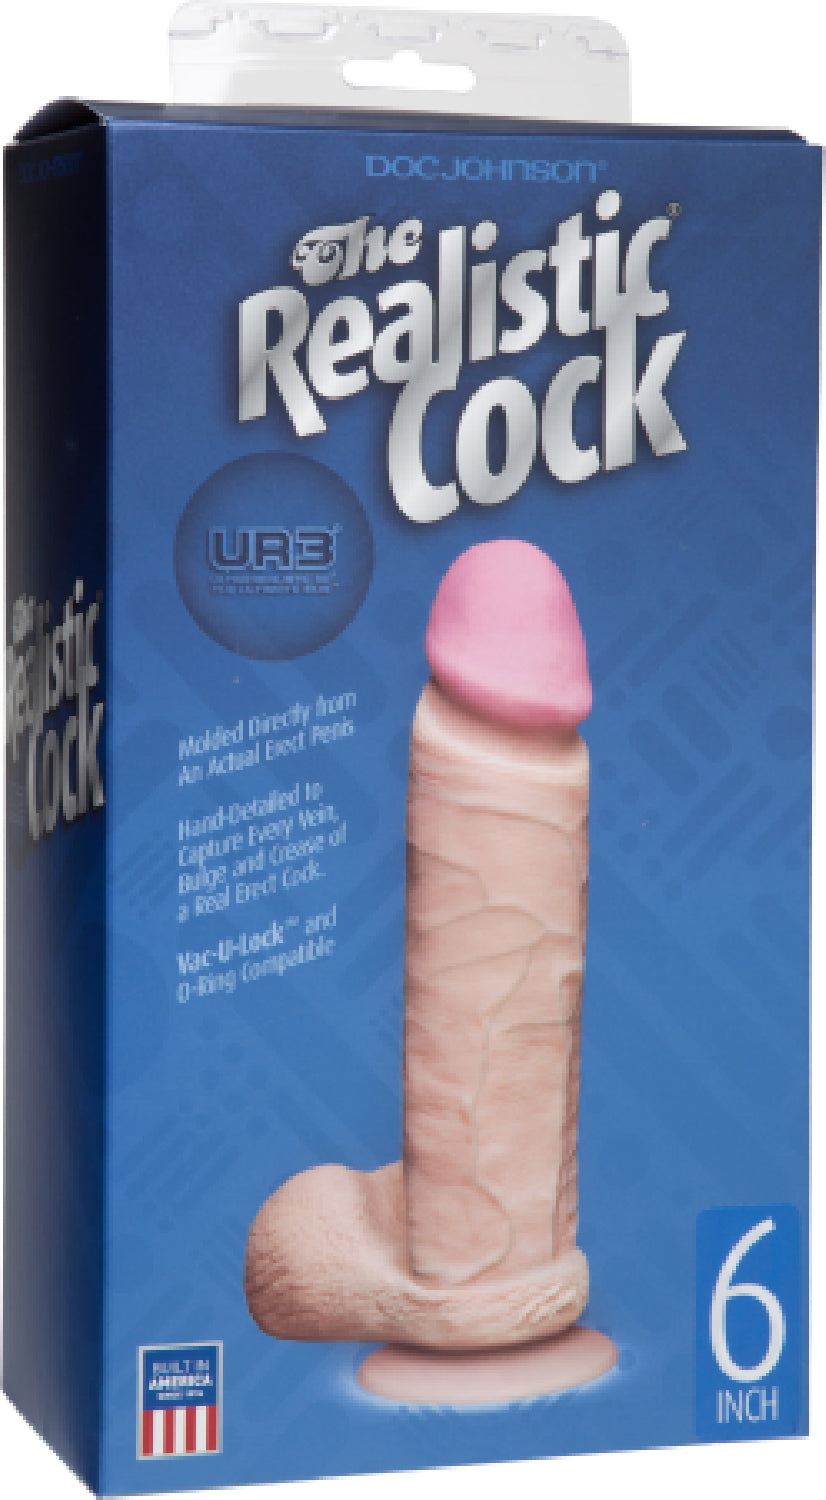 The Realistic Ur3 Cock 6